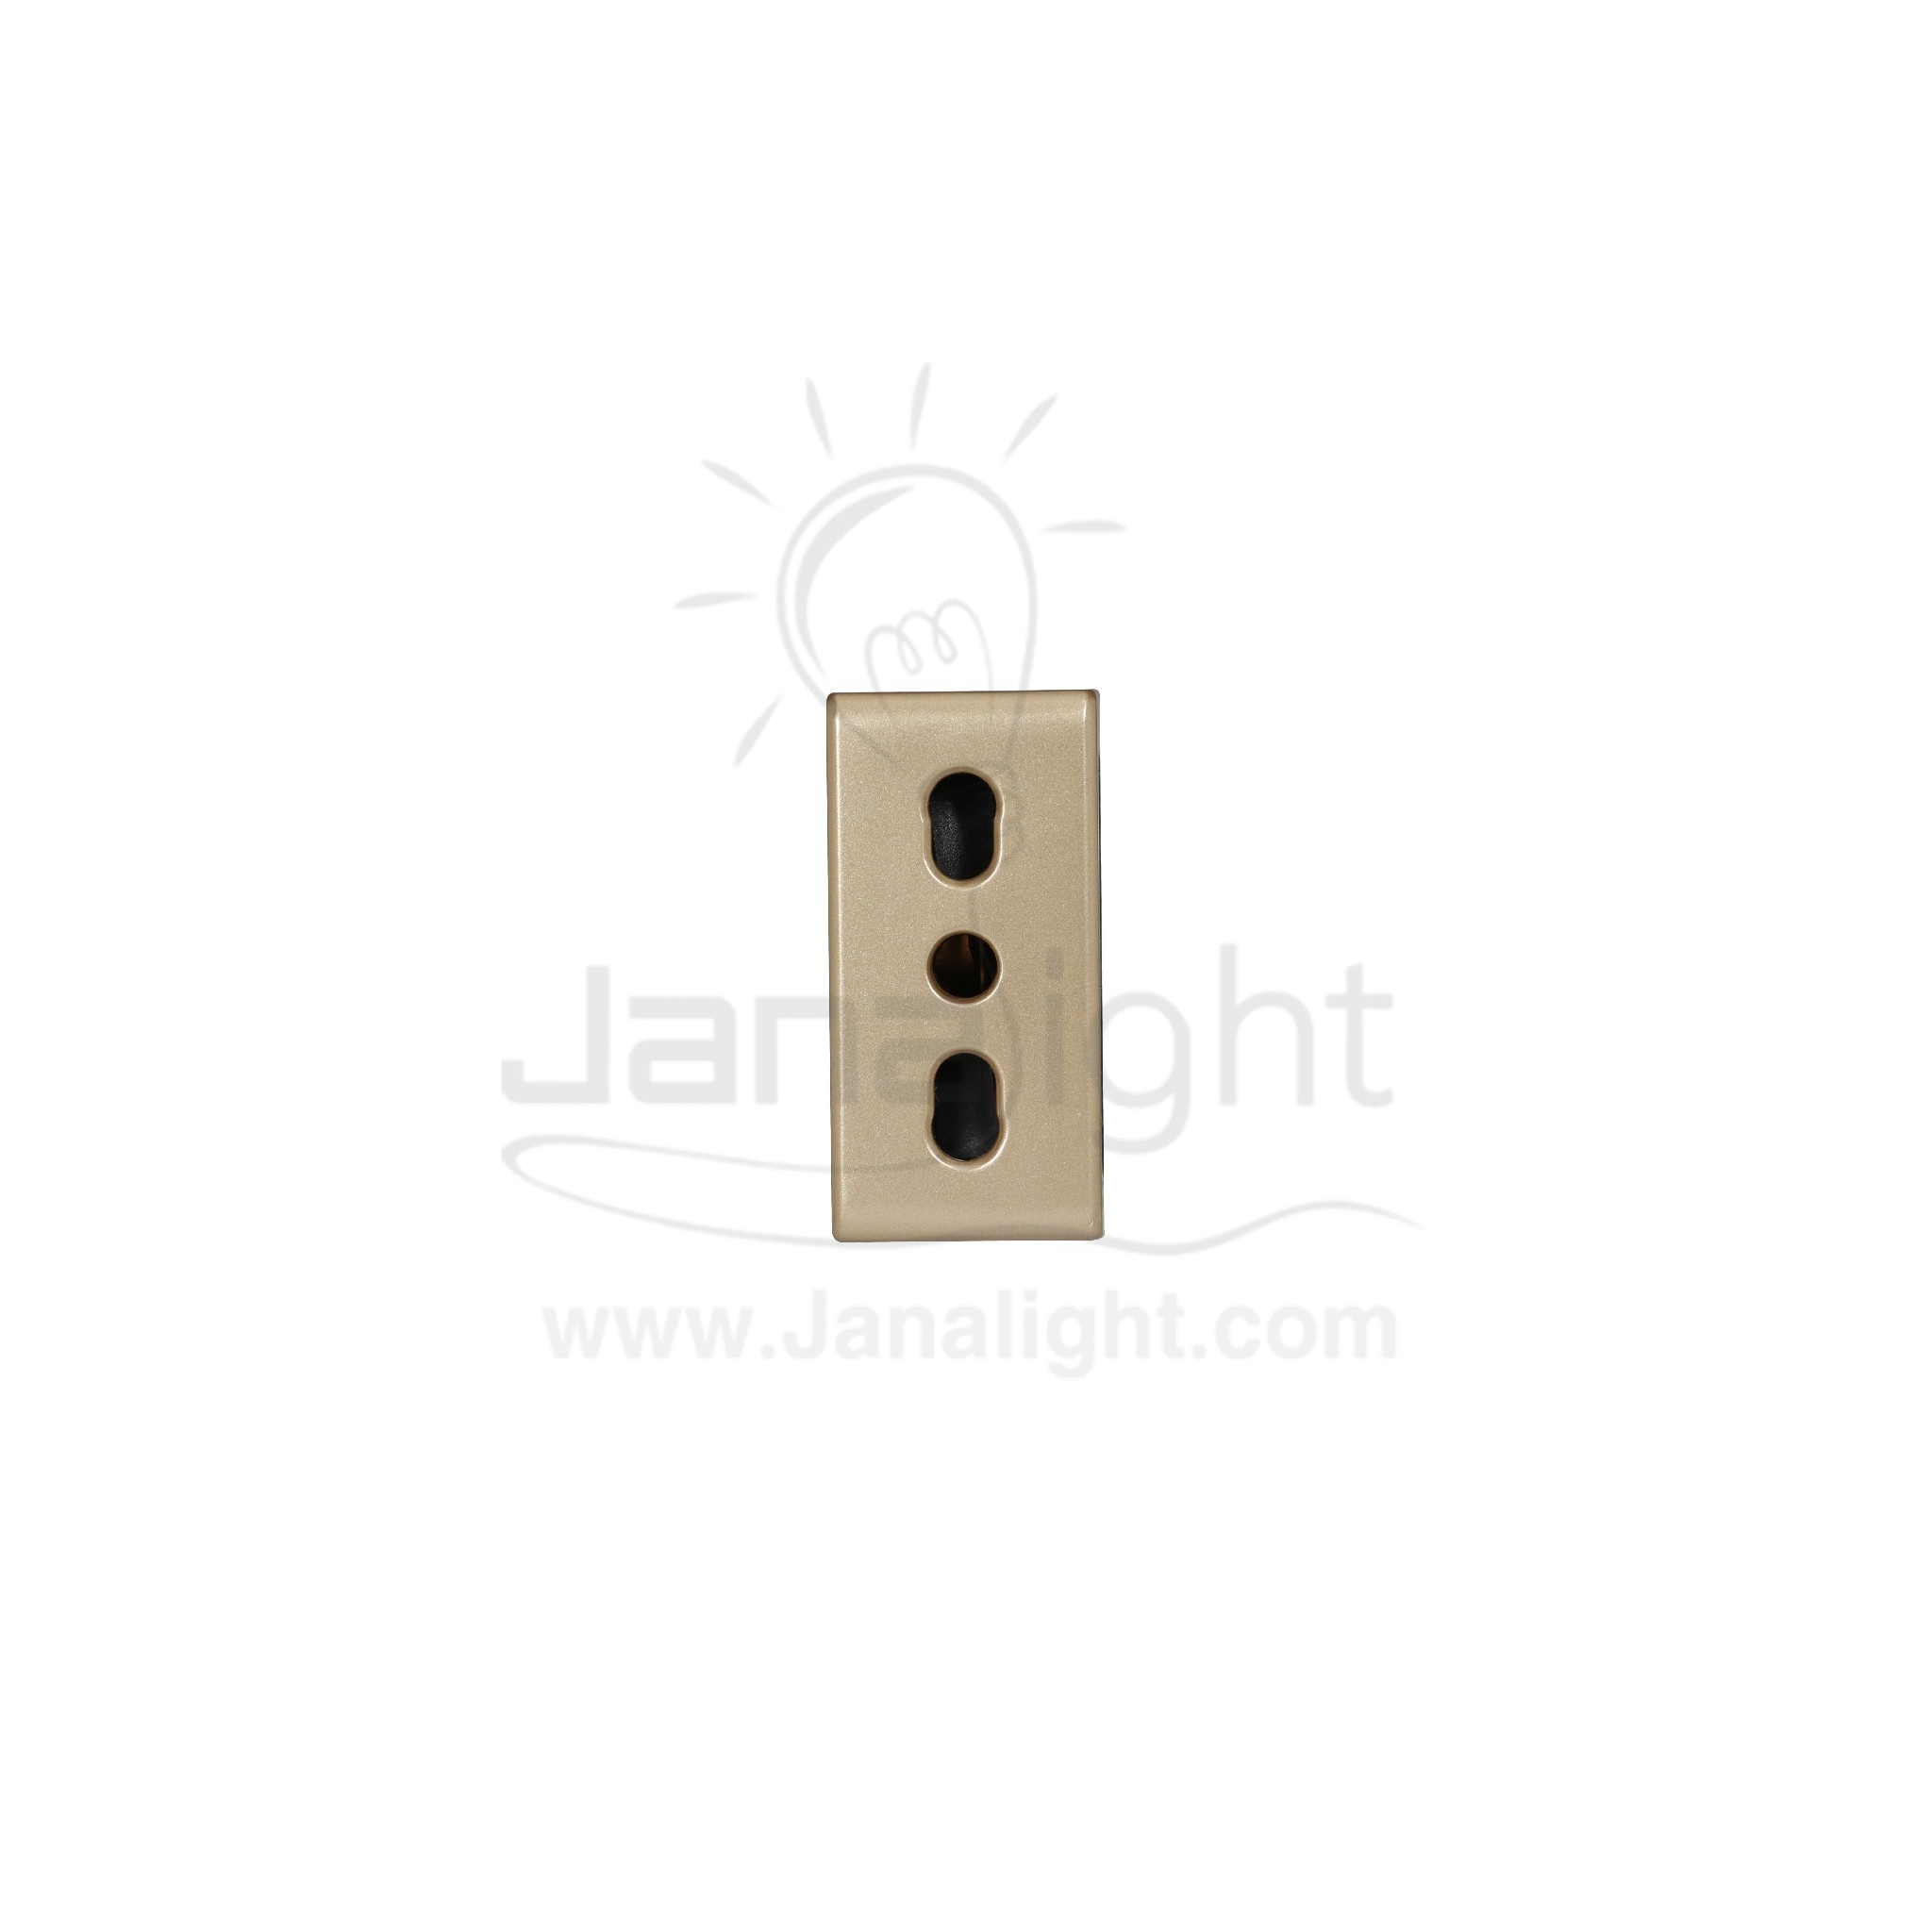 khind champagne socket with earth pin|بريزة ايرث شامبين خيند